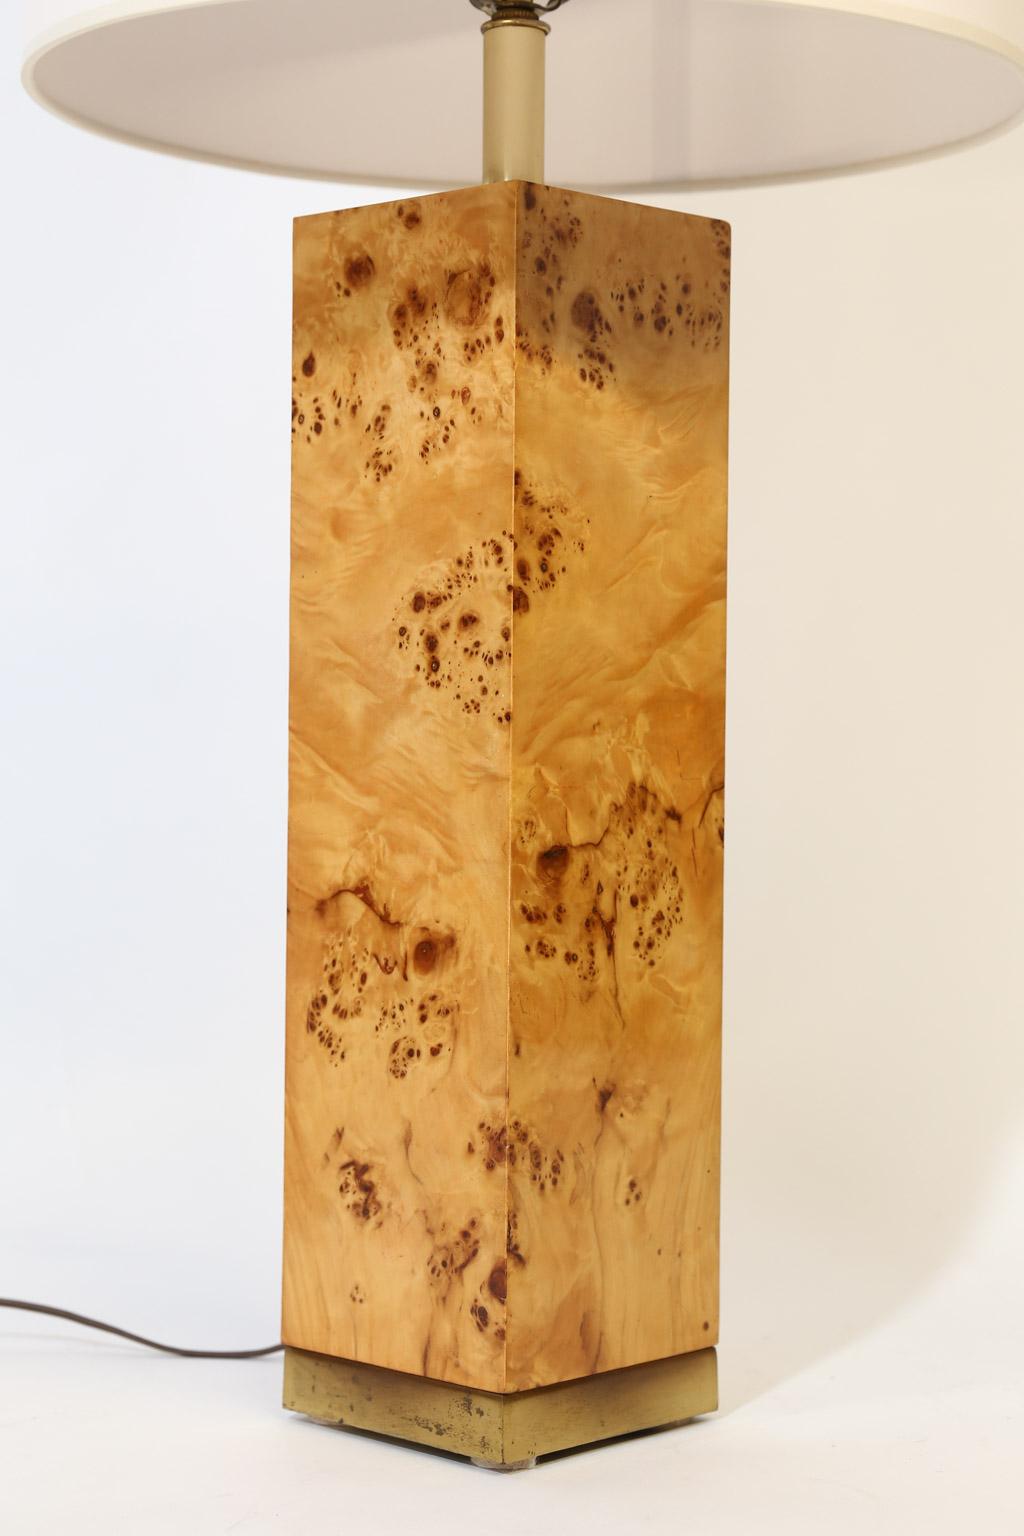 This beautiful Mid-Century Modern table lamp is made of burl wood and brass. The lamp boasts simple and clean lines consistent with the style of Milo Baughman. The lamp is accented with a brass base on the burl wood column. The shade is